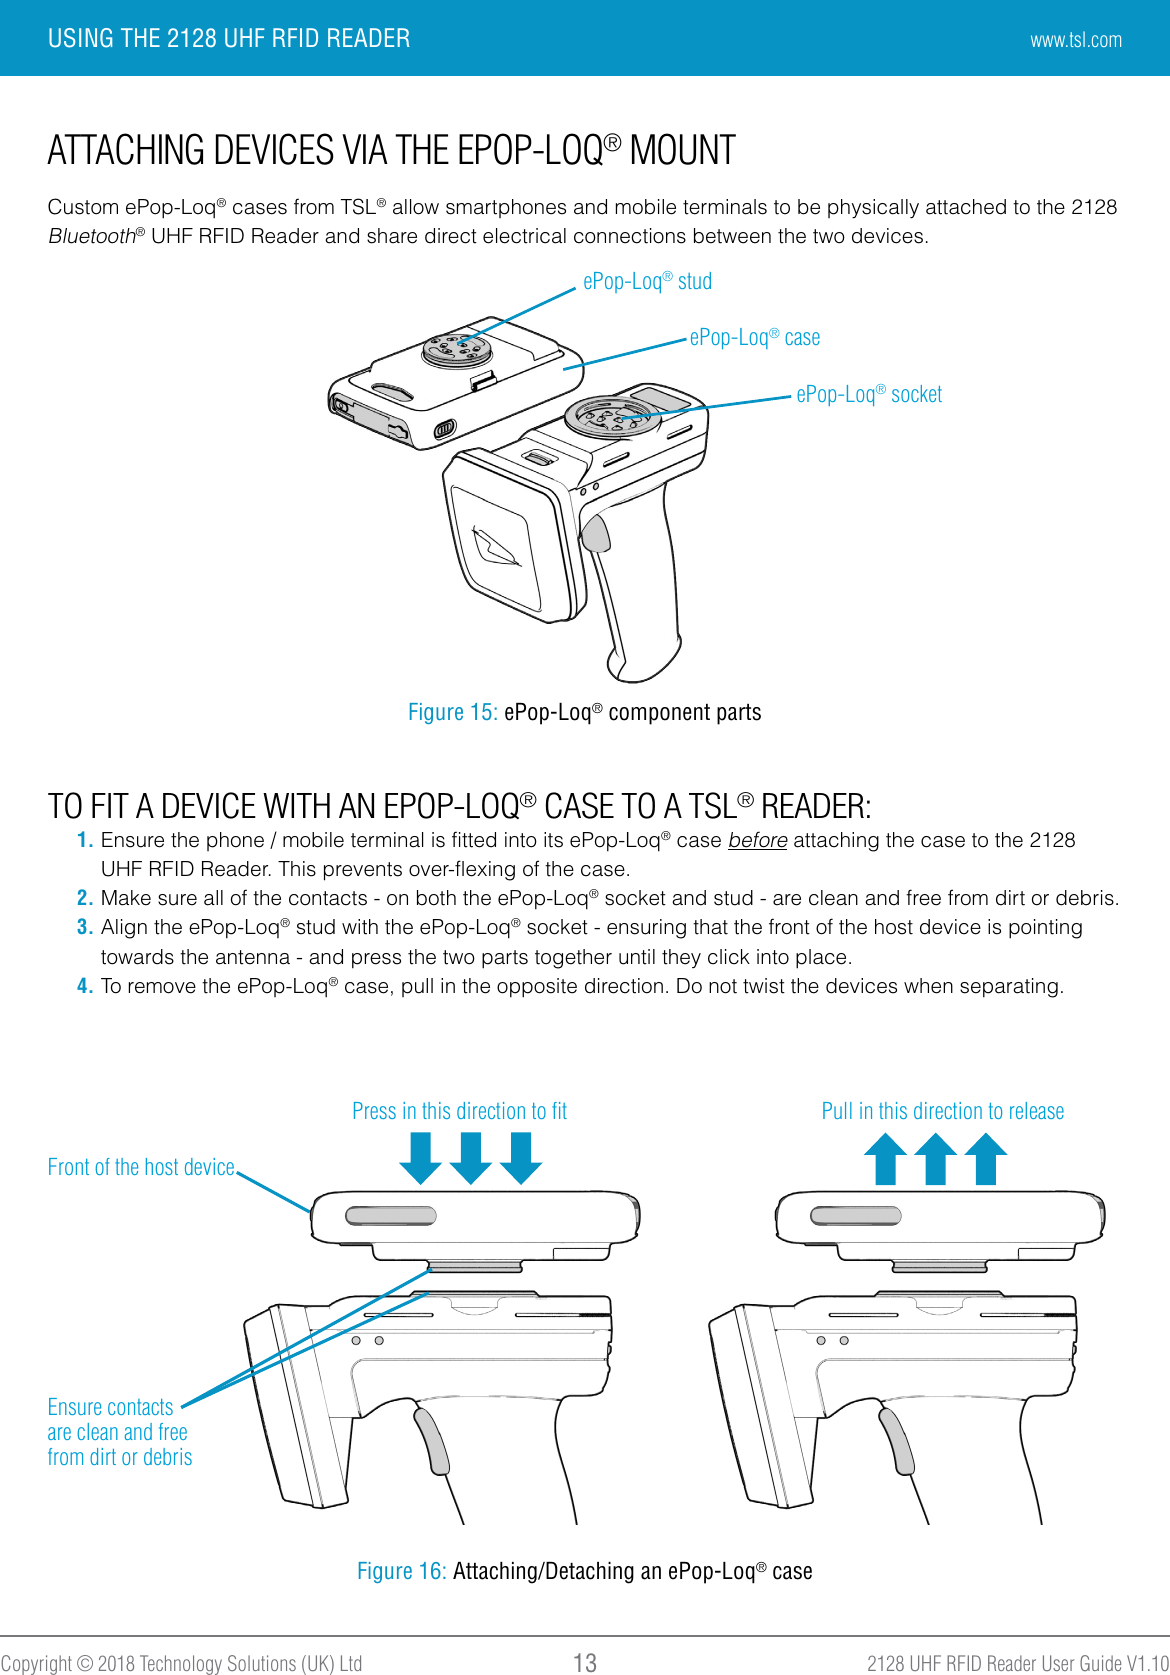 2128 UHF RFID Reader User Guide V1.10Copyright © 2018 Technology Solutions (UK) Ltd 13USING THE 2128 UHF RFID READERATTACHING DEVICES VIA THE EPOP-LOQ® MOUNTCustom ePop-Loq® cases from TSL® allow smartphones and mobile terminals to be physically attached to the 2128 Bluetooth® UHF RFID Reader and share direct electrical connections between the two devices.Figure 15: ePop-Loq® component partsFigure 16: Attaching/Detaching an ePop-Loq® casePress in this direction to ﬁtTO FIT A DEVICE WITH AN EPOP-LOQ® CASE TO A TSL® READER:1. Ensure the phone / mobile terminal is fitted into its ePop-Loq® case before attaching the case to the 2128 UHF RFID Reader. This prevents over-flexing of the case.2. Make sure all of the contacts - on both the ePop-Loq® socket and stud - are clean and free from dirt or debris.3. Align the ePop-Loq® stud with the ePop-Loq® socket - ensuring that the front of the host device is pointing towards the antenna - and press the two parts together until they click into place.4. To remove the ePop-Loq® case, pull in the opposite direction. Do not twist the devices when separating.ePop-Loq® studePop-Loq® socketPull in this direction to releaseEnsure contacts are clean and free from dirt or debrisePop-Loq® caseFront of the host devicewww.tsl.com